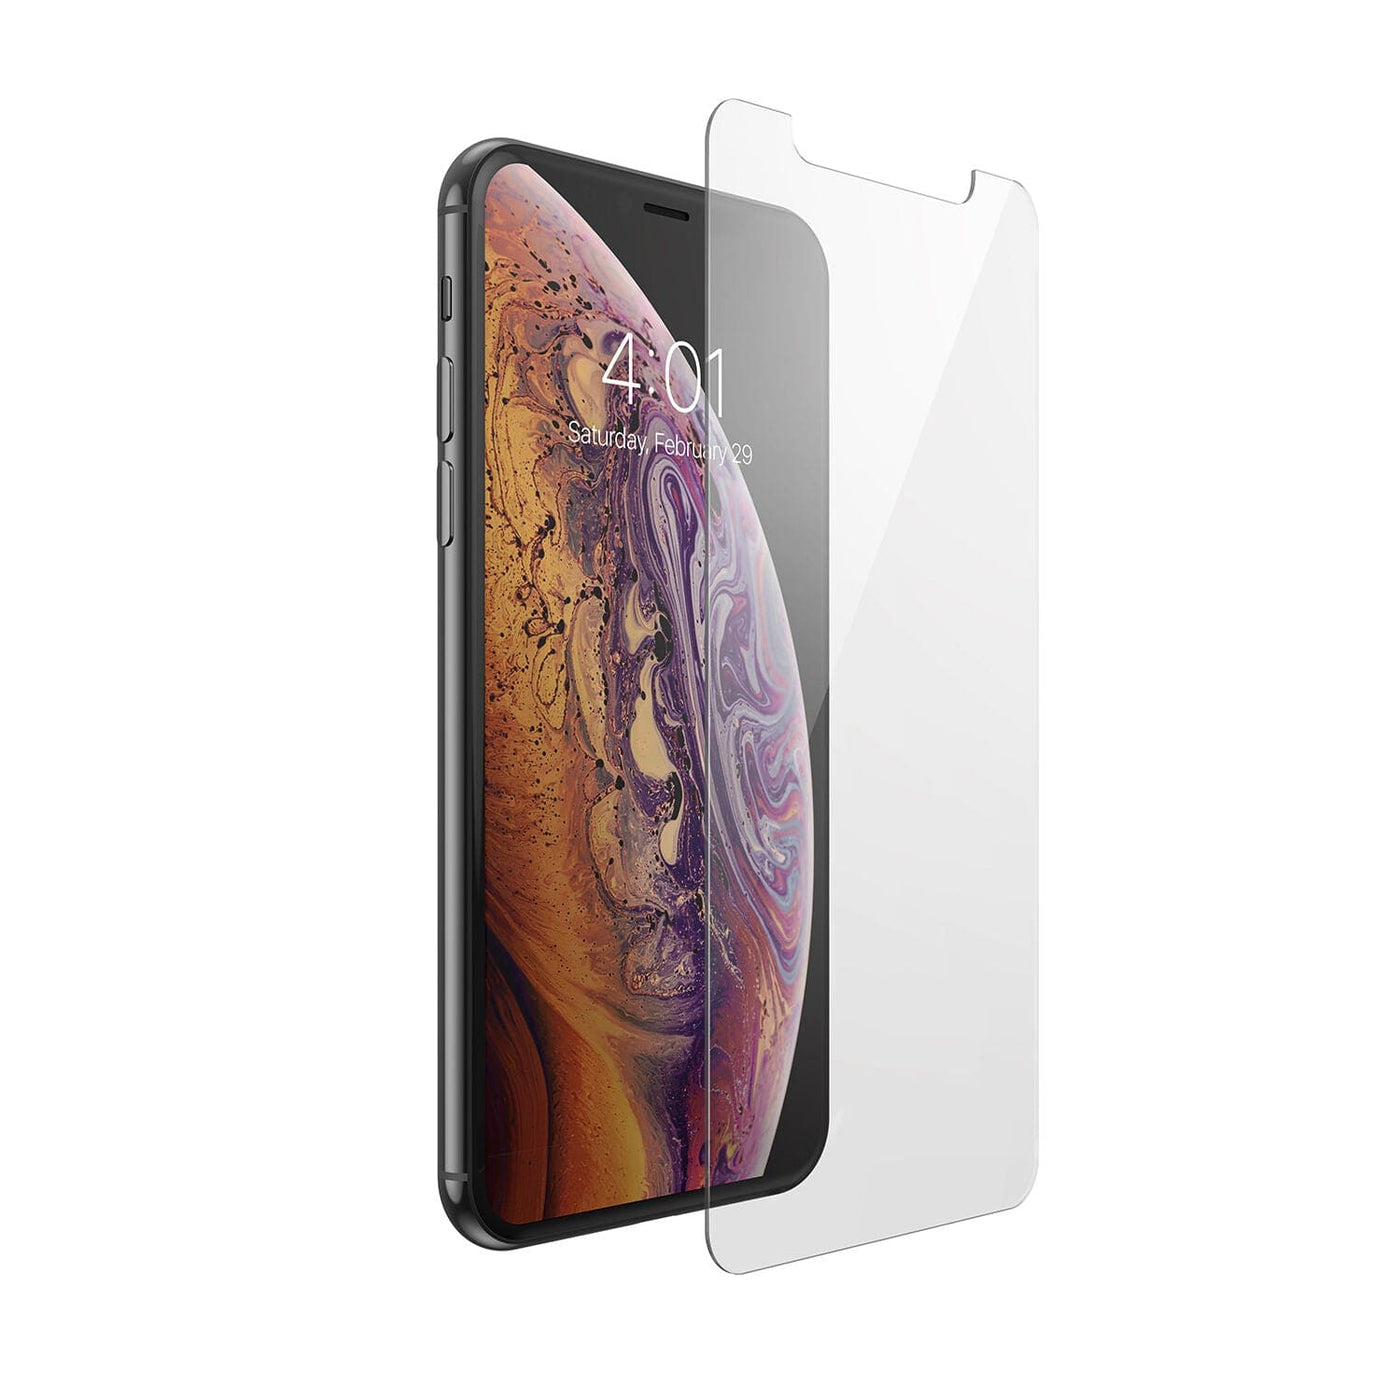 Speck ShieldView Glass iPhone 11 / XR Screen Protector Best iPhone 11 /  iPhone XR - $49.99